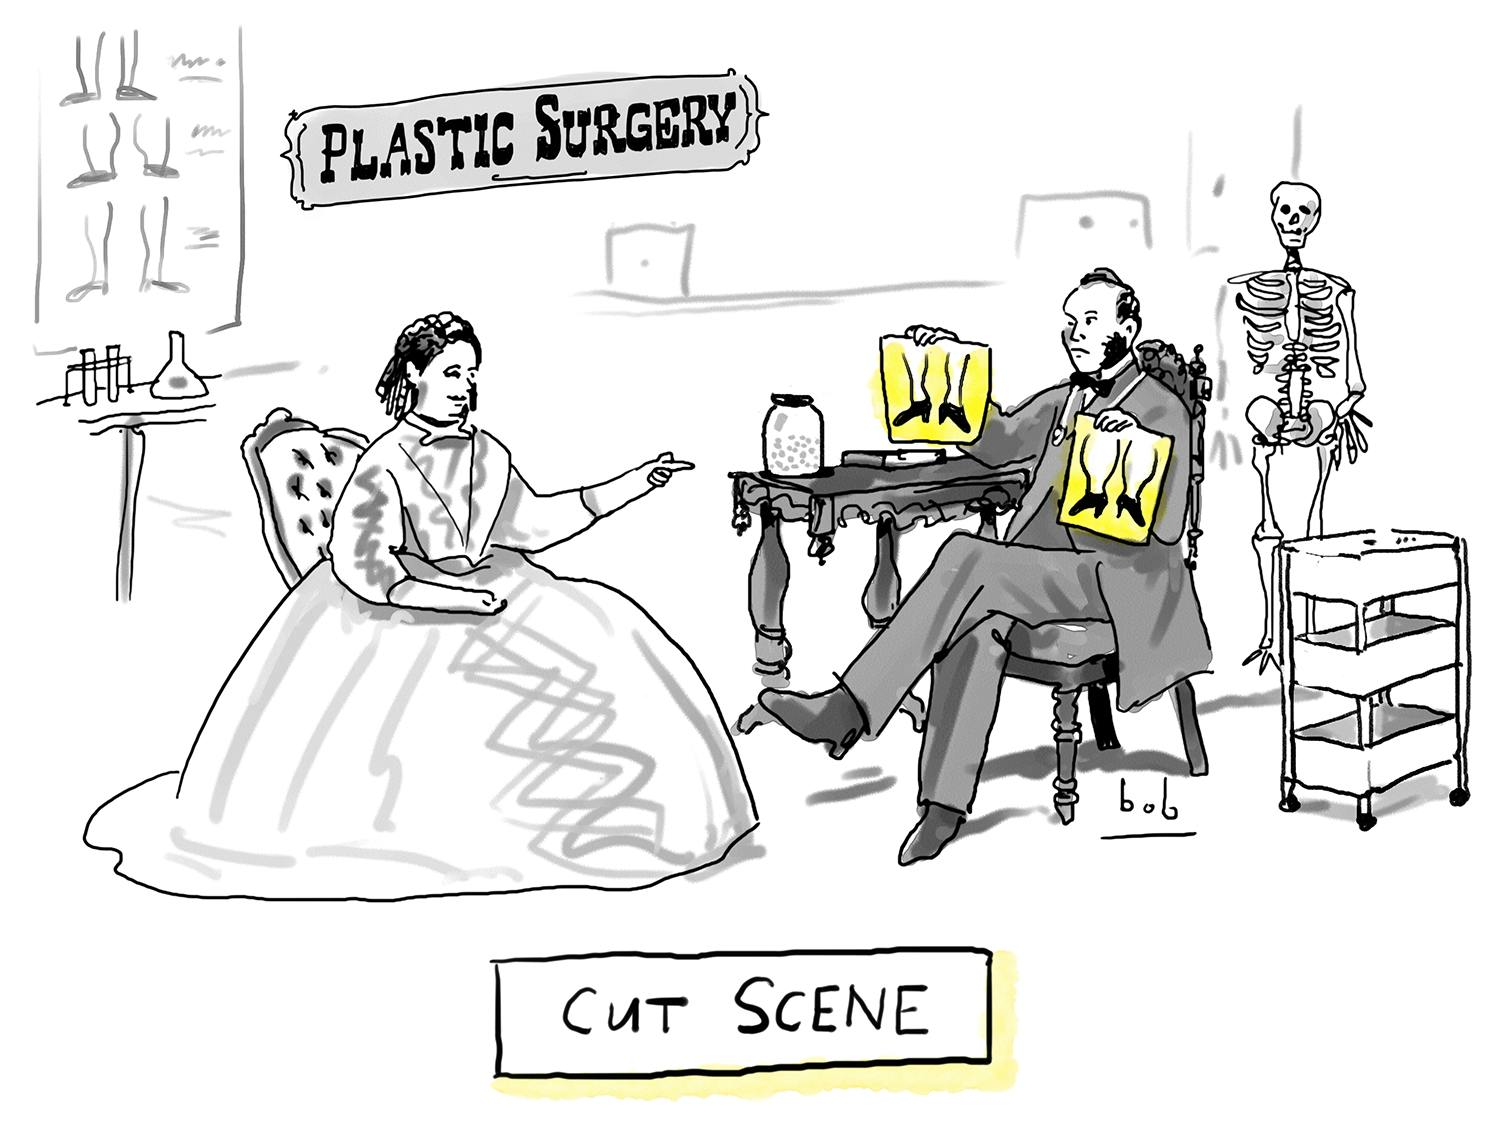 Cartoon: In a gilded age plastic surgery office, a surgeon and a prospective female patient, both wearing full period garb, sit in chairs facing one another. The surgeon holds up two images of female calves and ankles, and the patient points at the one she wants for herself, which is the more plump option. The caption beneath reads: “Cut scene”.